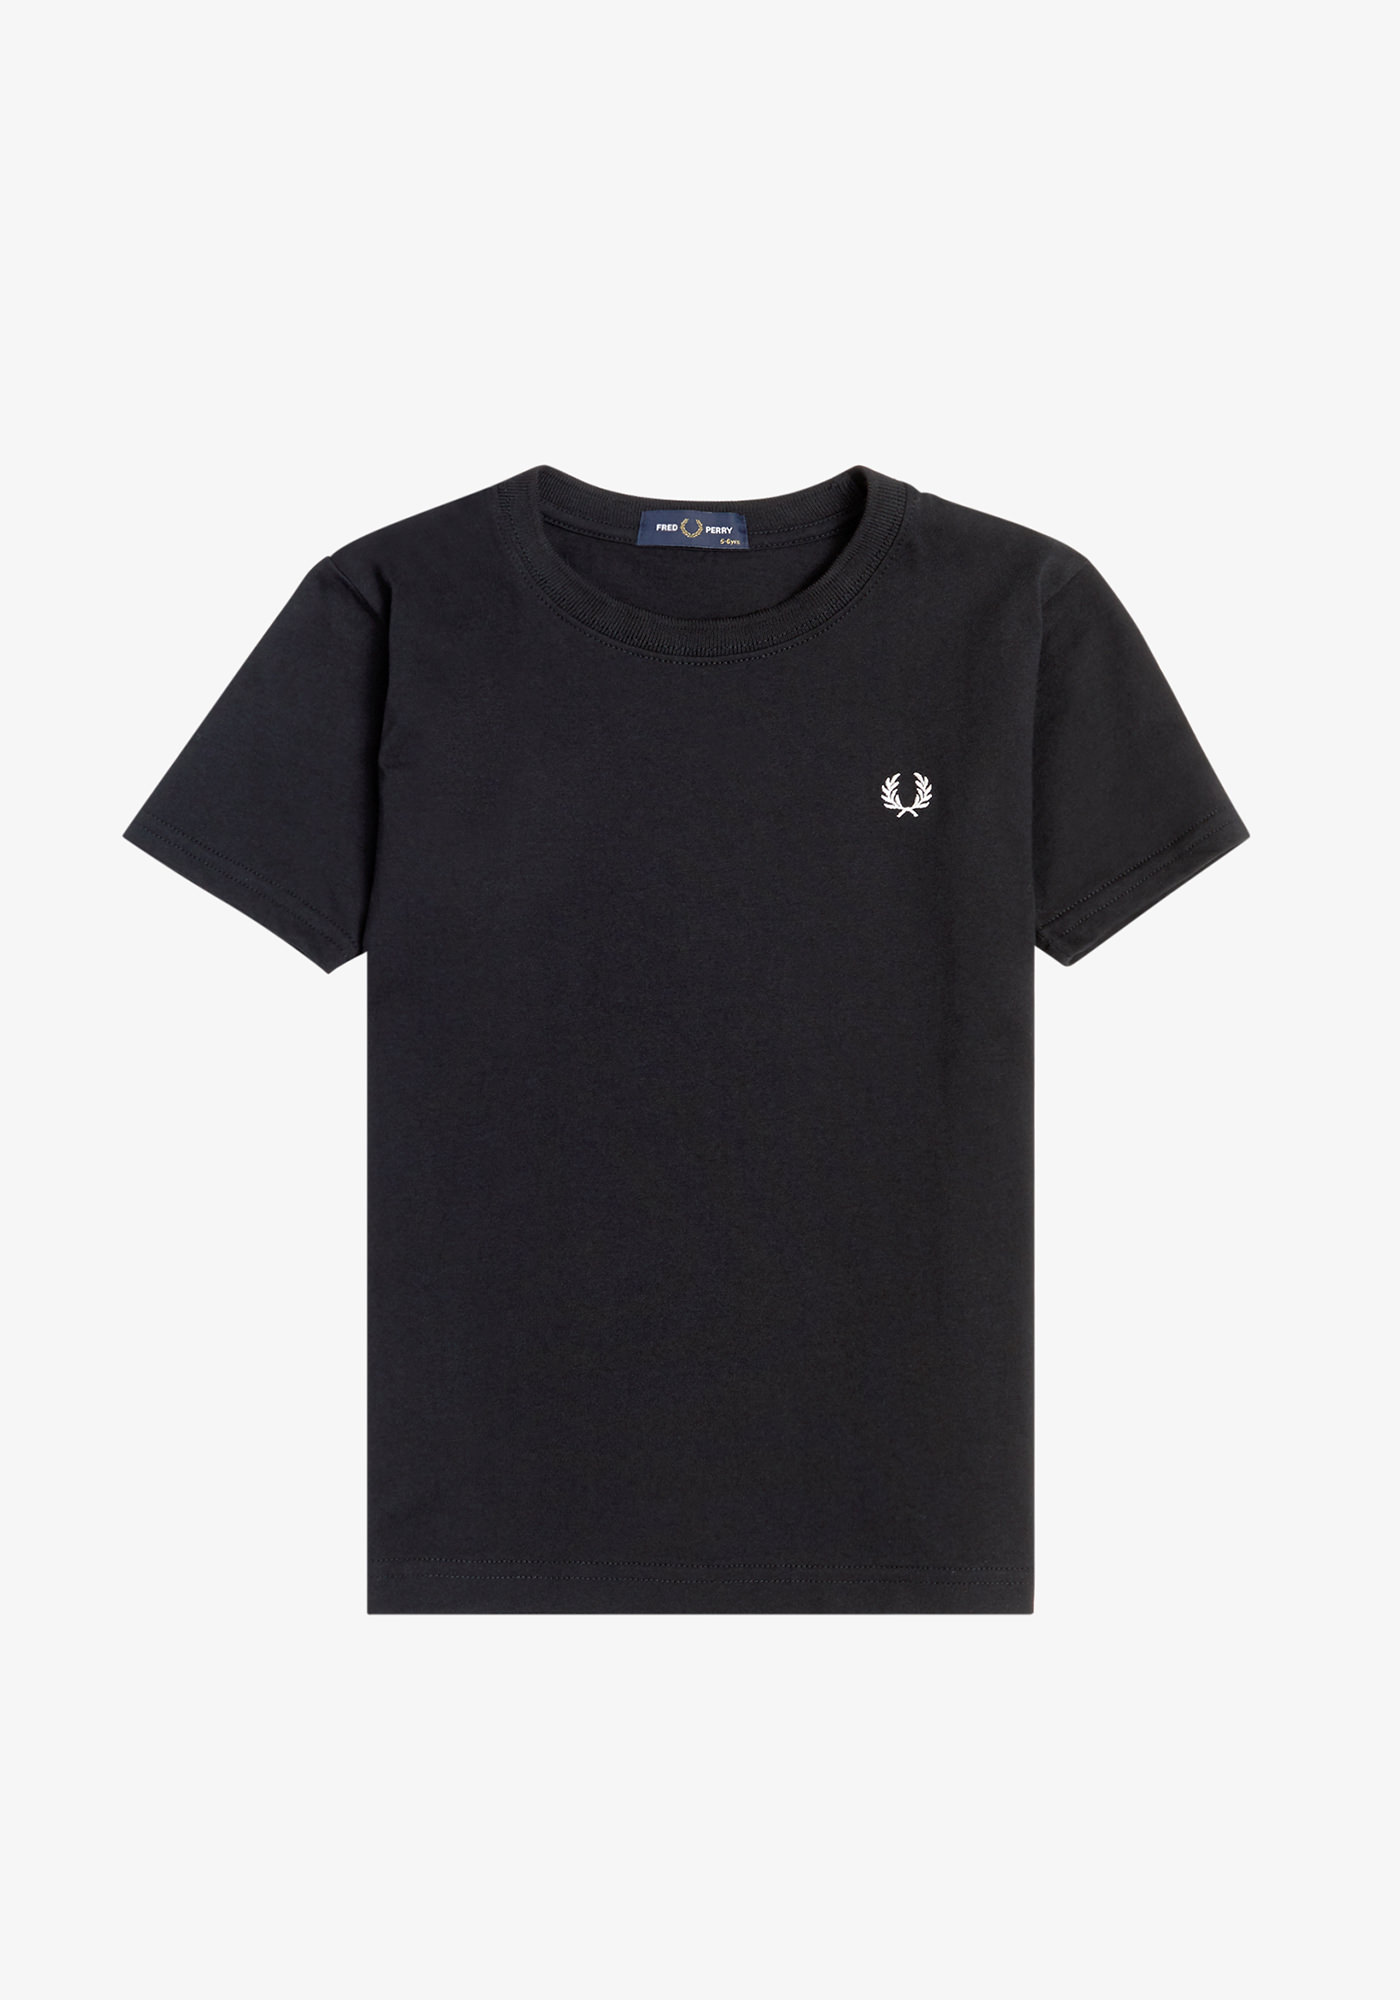 Tシャツ キッズ フレッドペリー カットソー FRED PERRY KIDS CREW NECK T-SHIRT 100-130cm｜betterdays777｜02